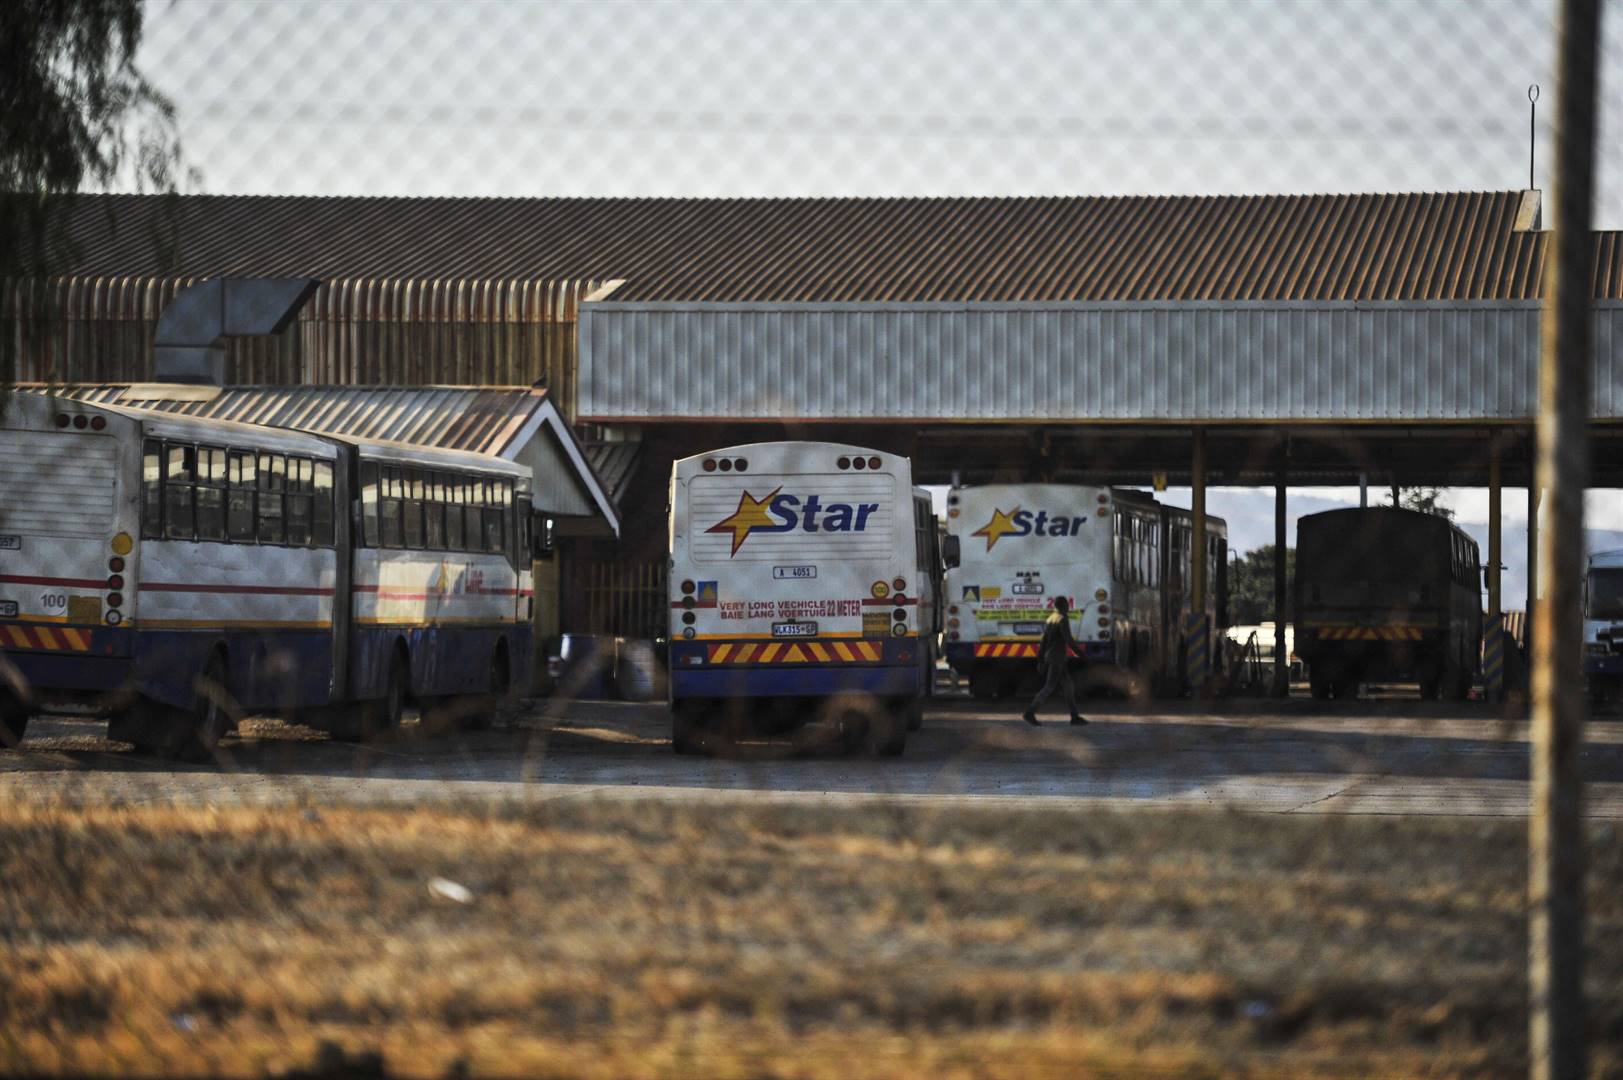 North West Transport Investment buses at the depot in Samcor Park, Pretoria. Picture: Rosetta Msimango/City Press